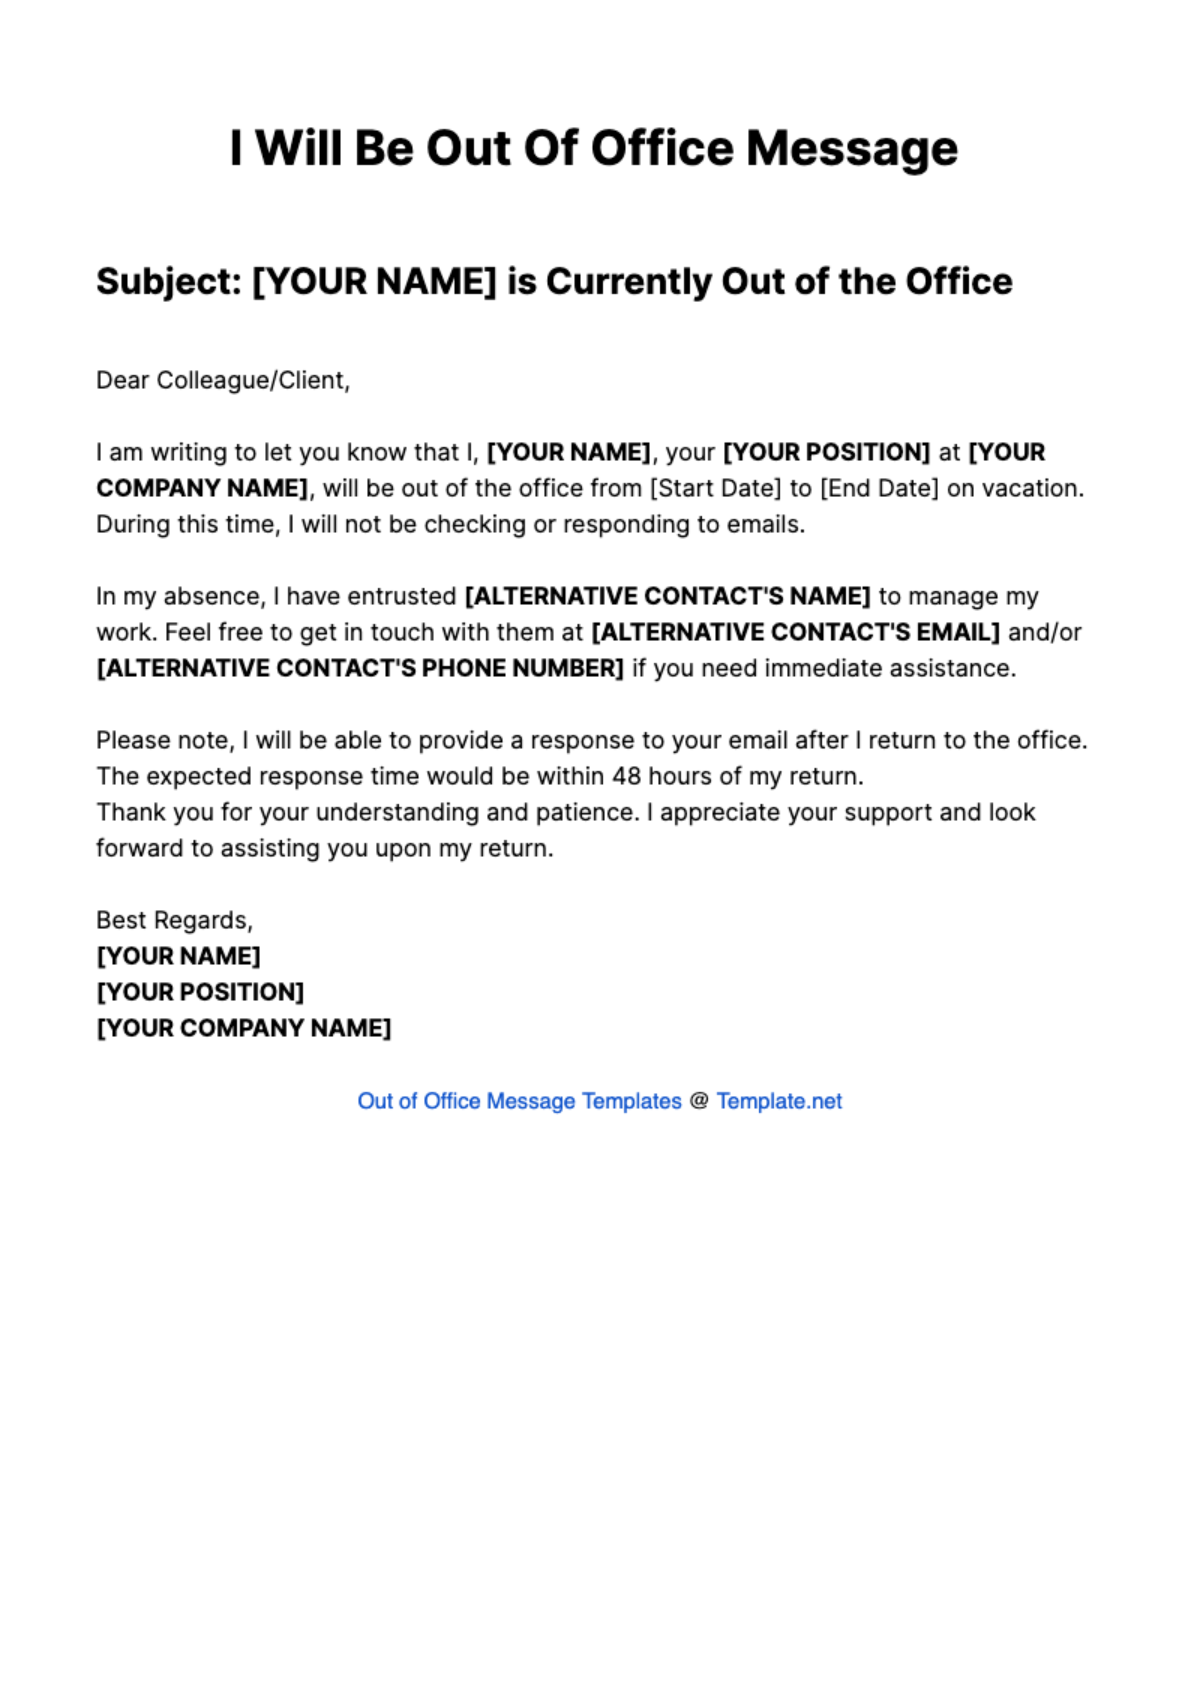 I Will Be Out Of Office Message Template